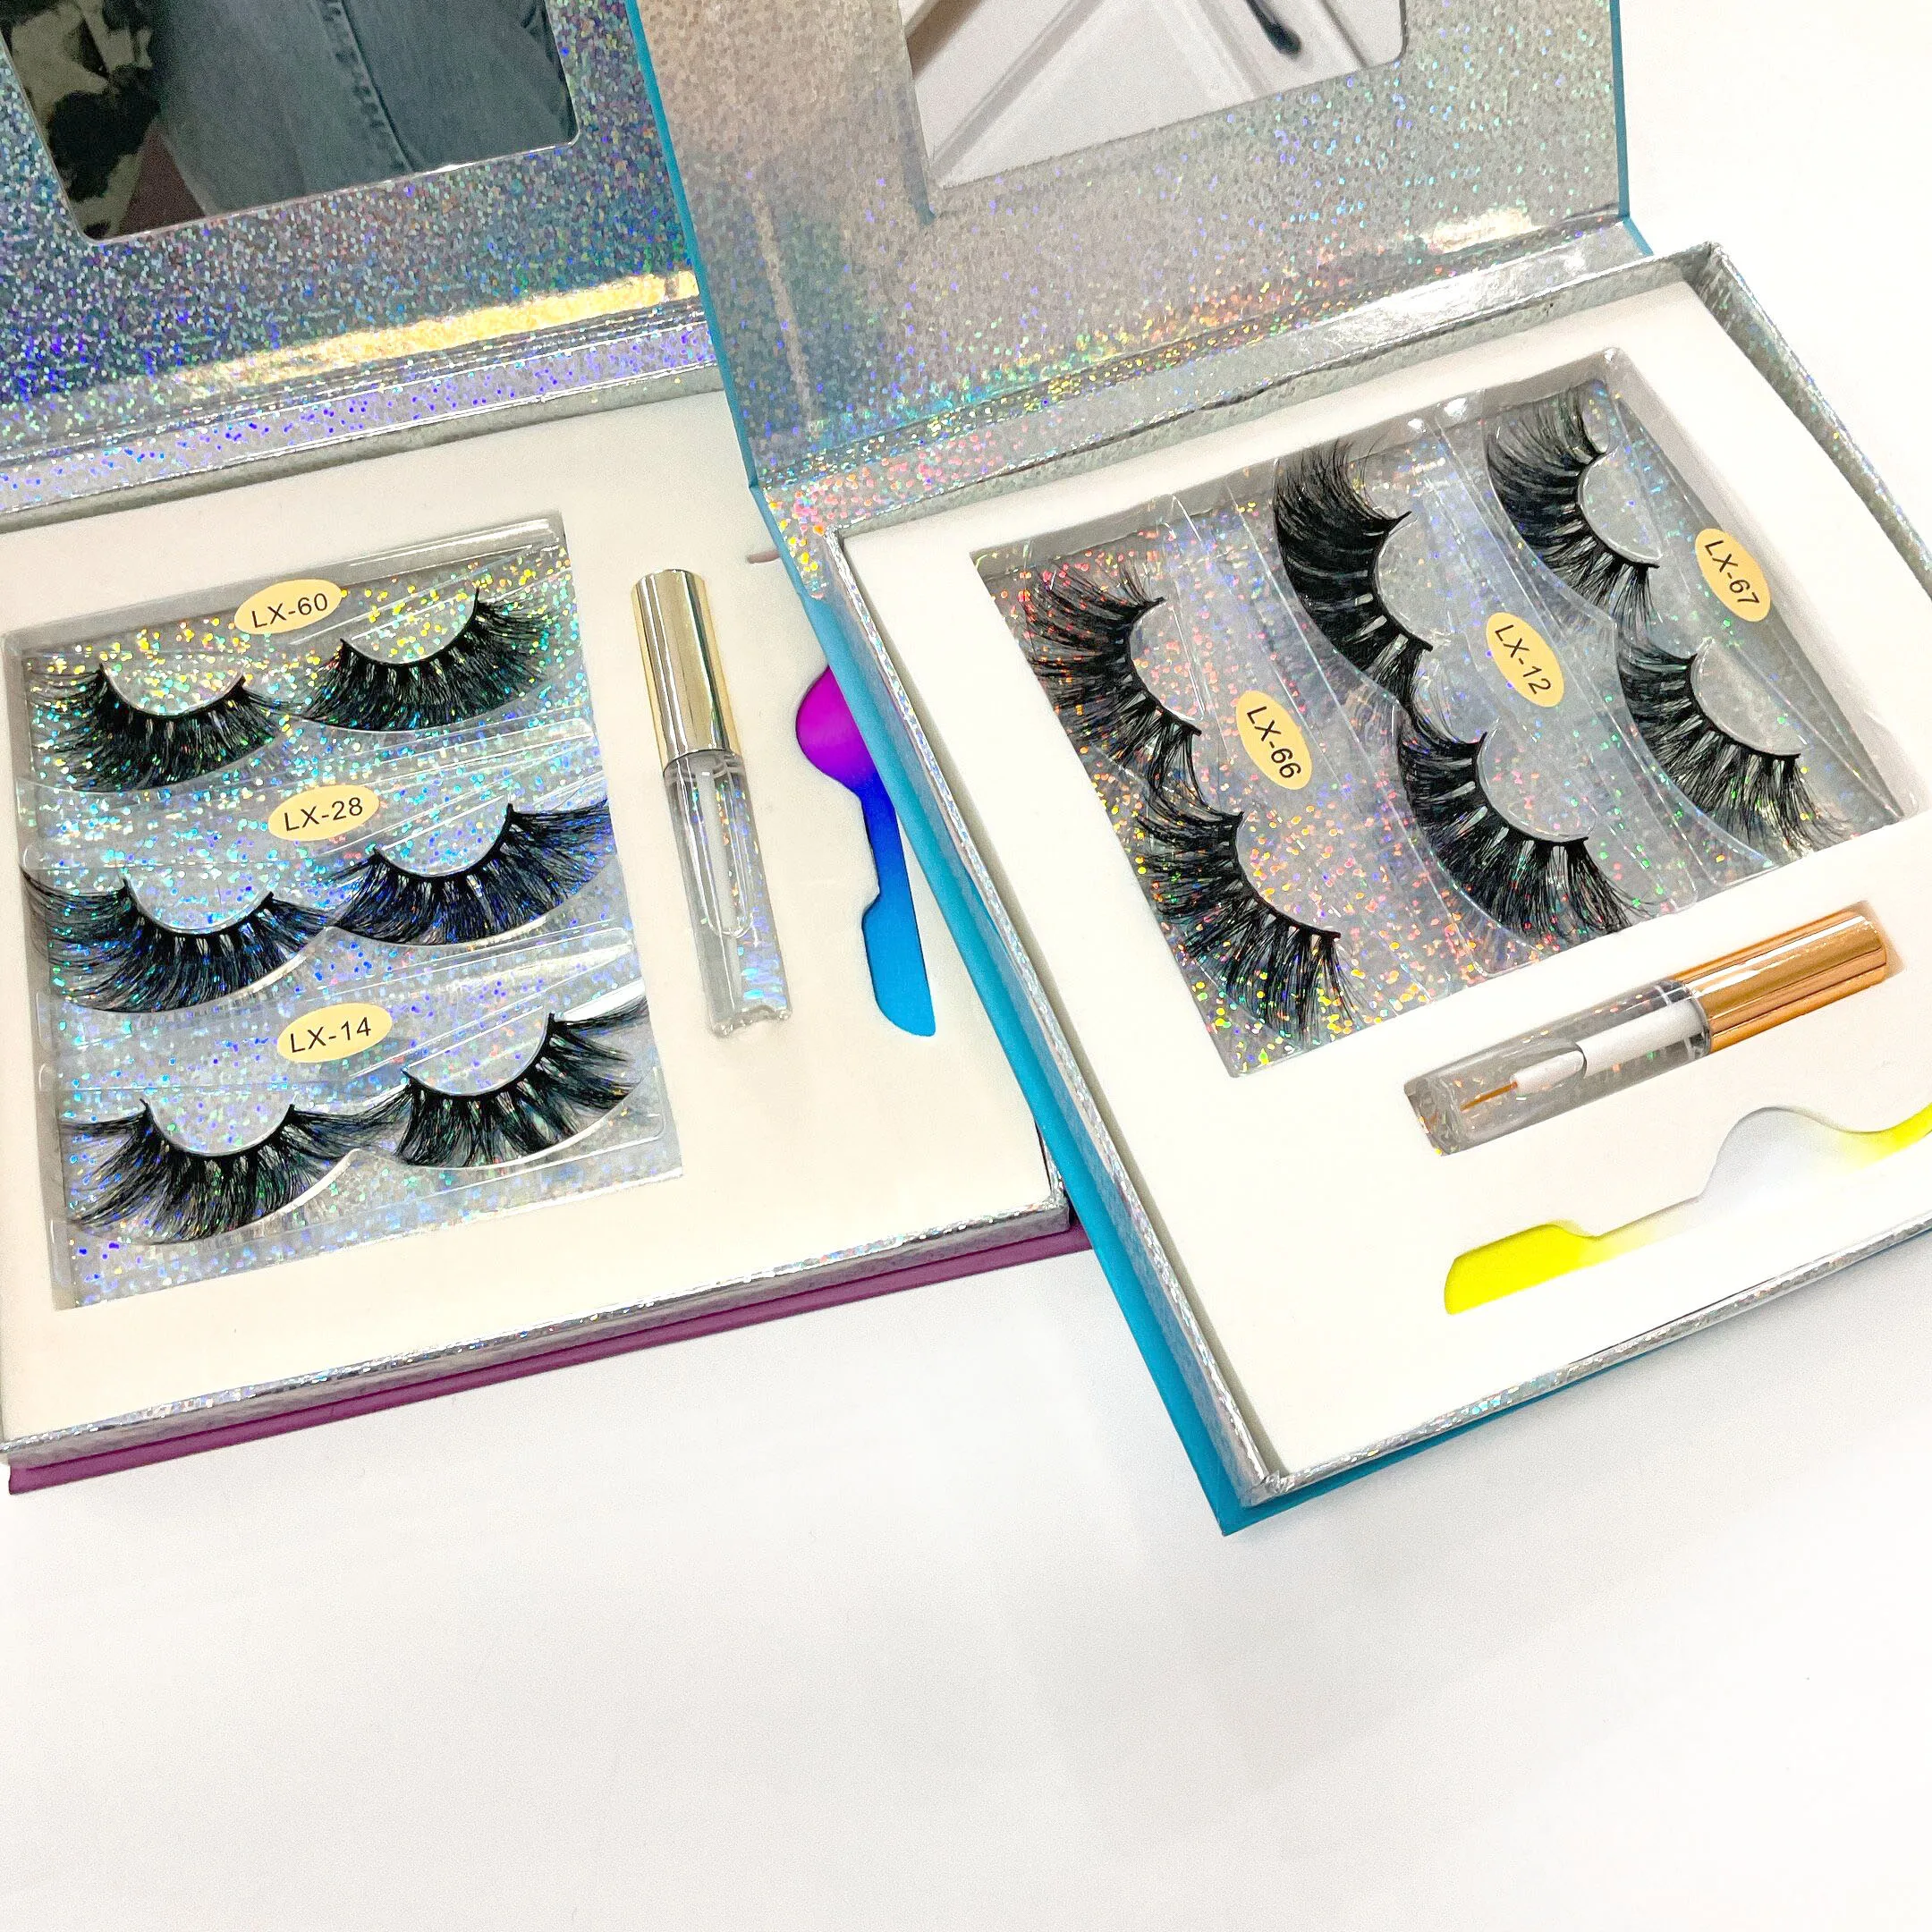 

Wholesale Private Label 25 mm 3d Mink Lashes 25mm Eyelashes Full Strip Lashes With Custom Packaging, Black